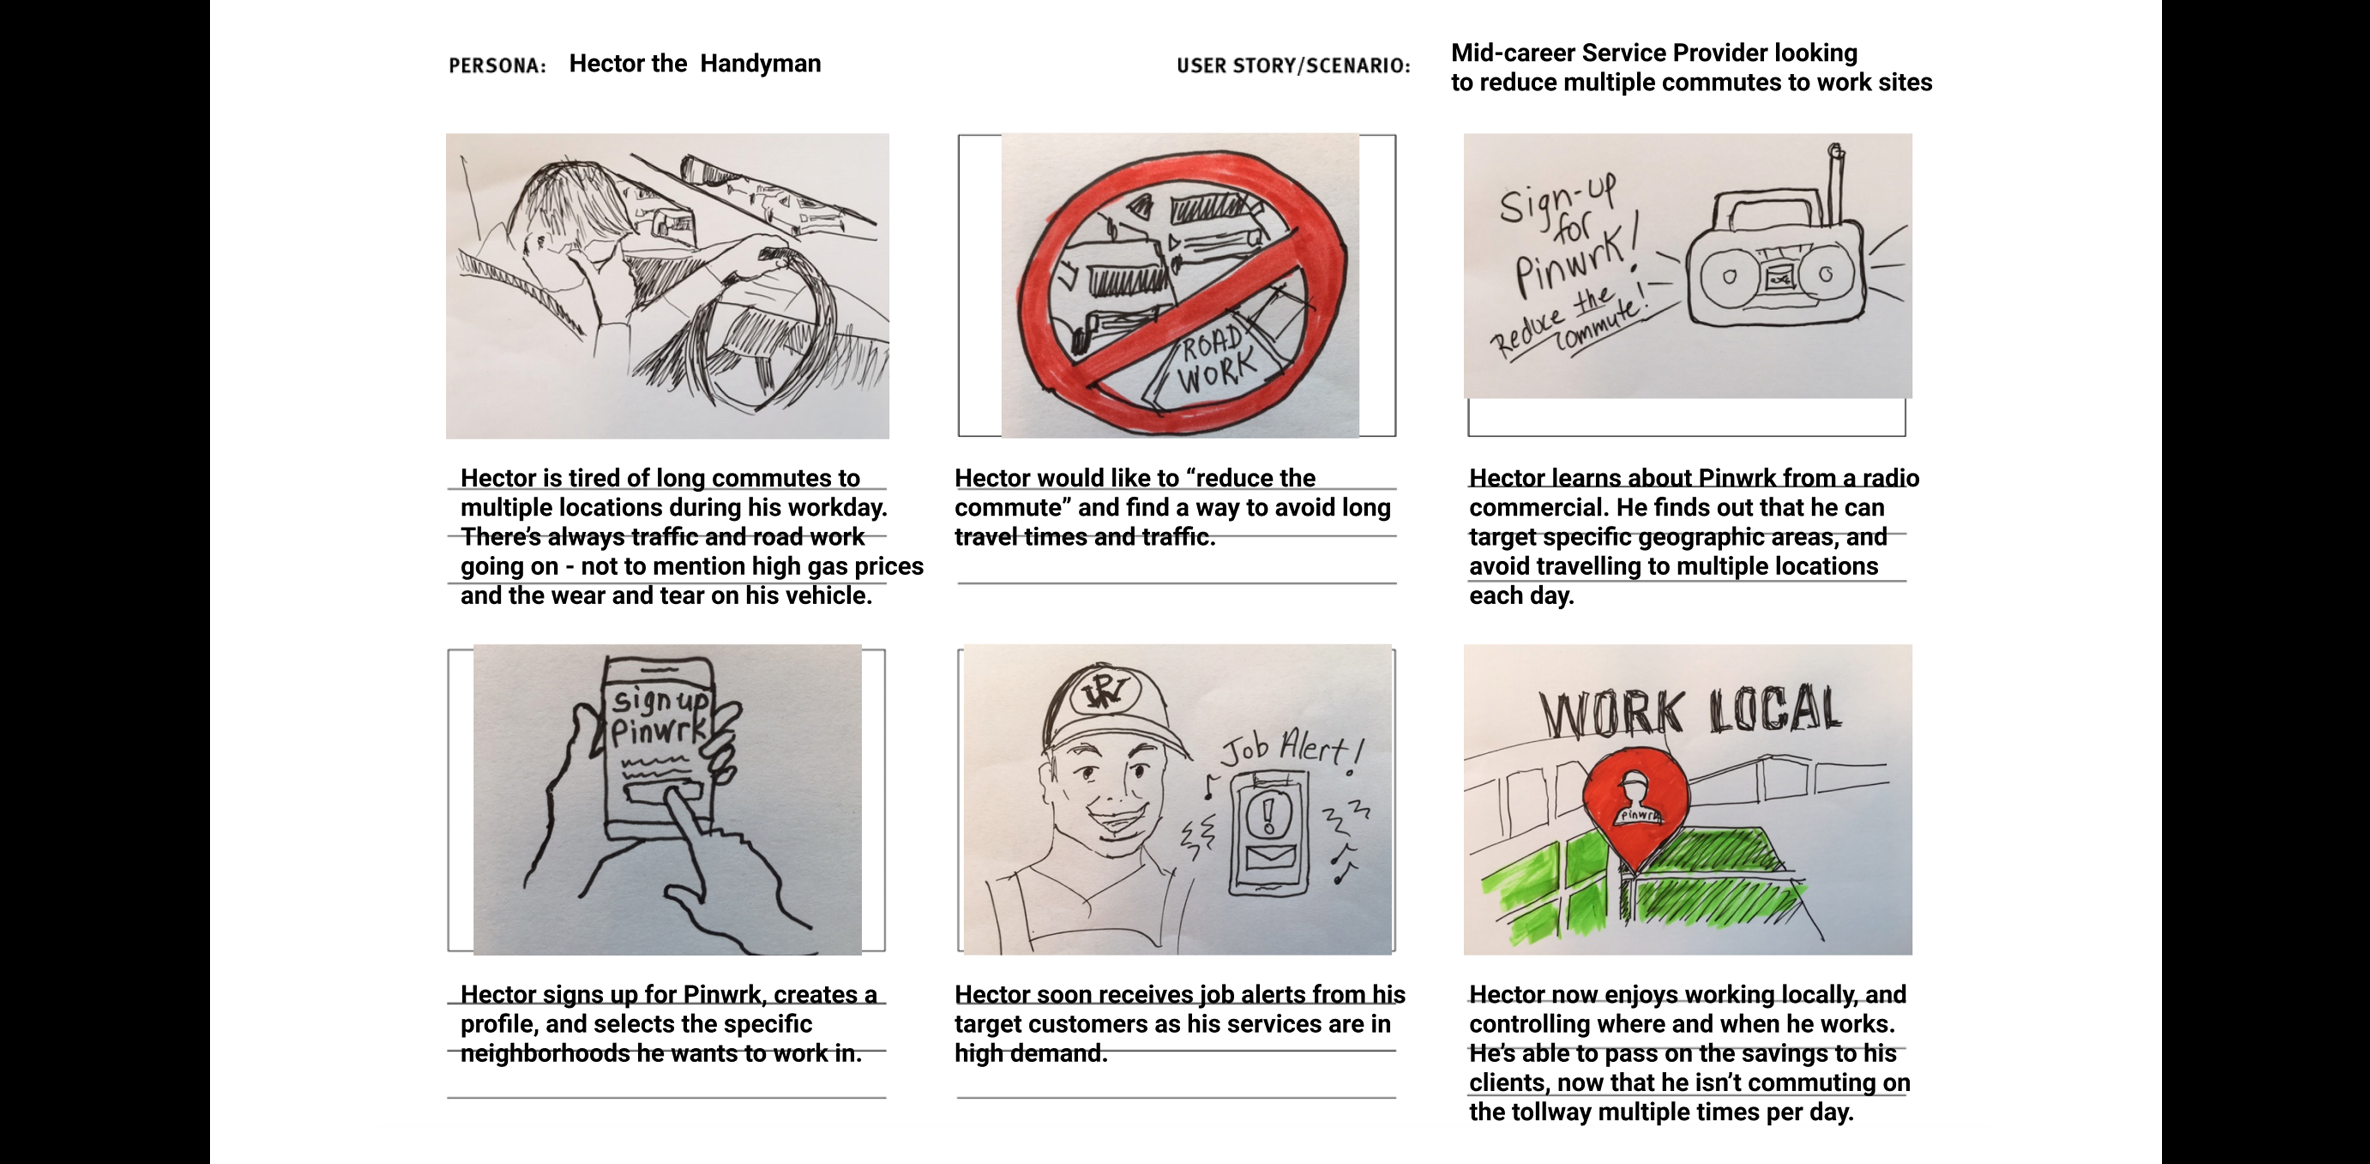 Storyboard of Hector the Handyman looking to consolidate work in his area.